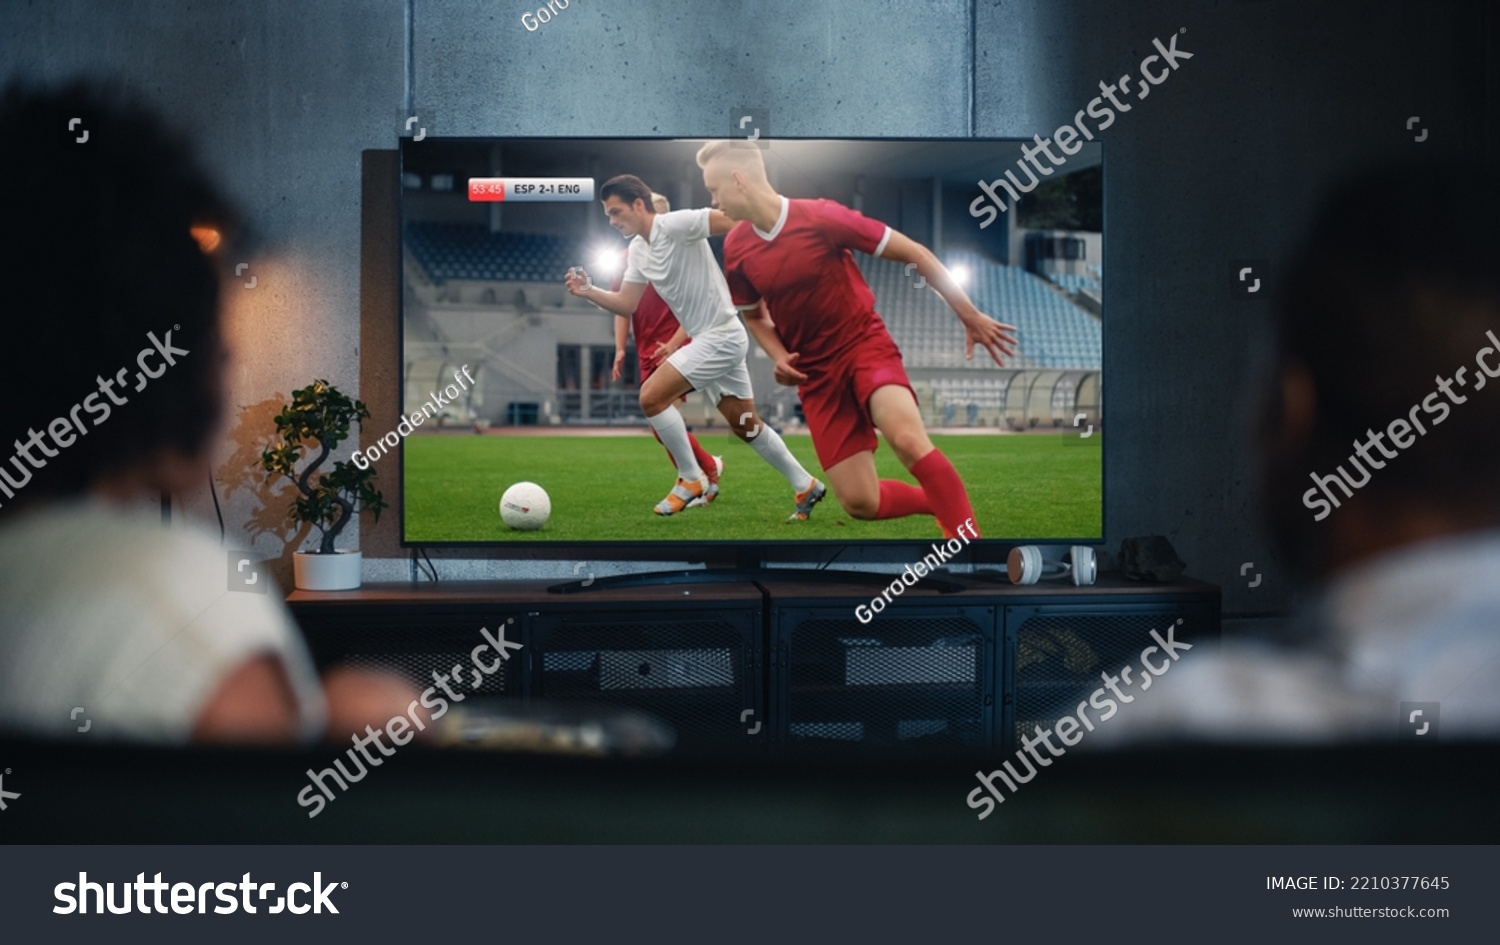 Black Couple Watches Professional Soccer Match on TV, Sitting on a Couch at Home in the Evening. Boyfriend and Girlfriend Football Fans Watch Sports. Back View Out of Focus Close Up Shot at Night. #2210377645